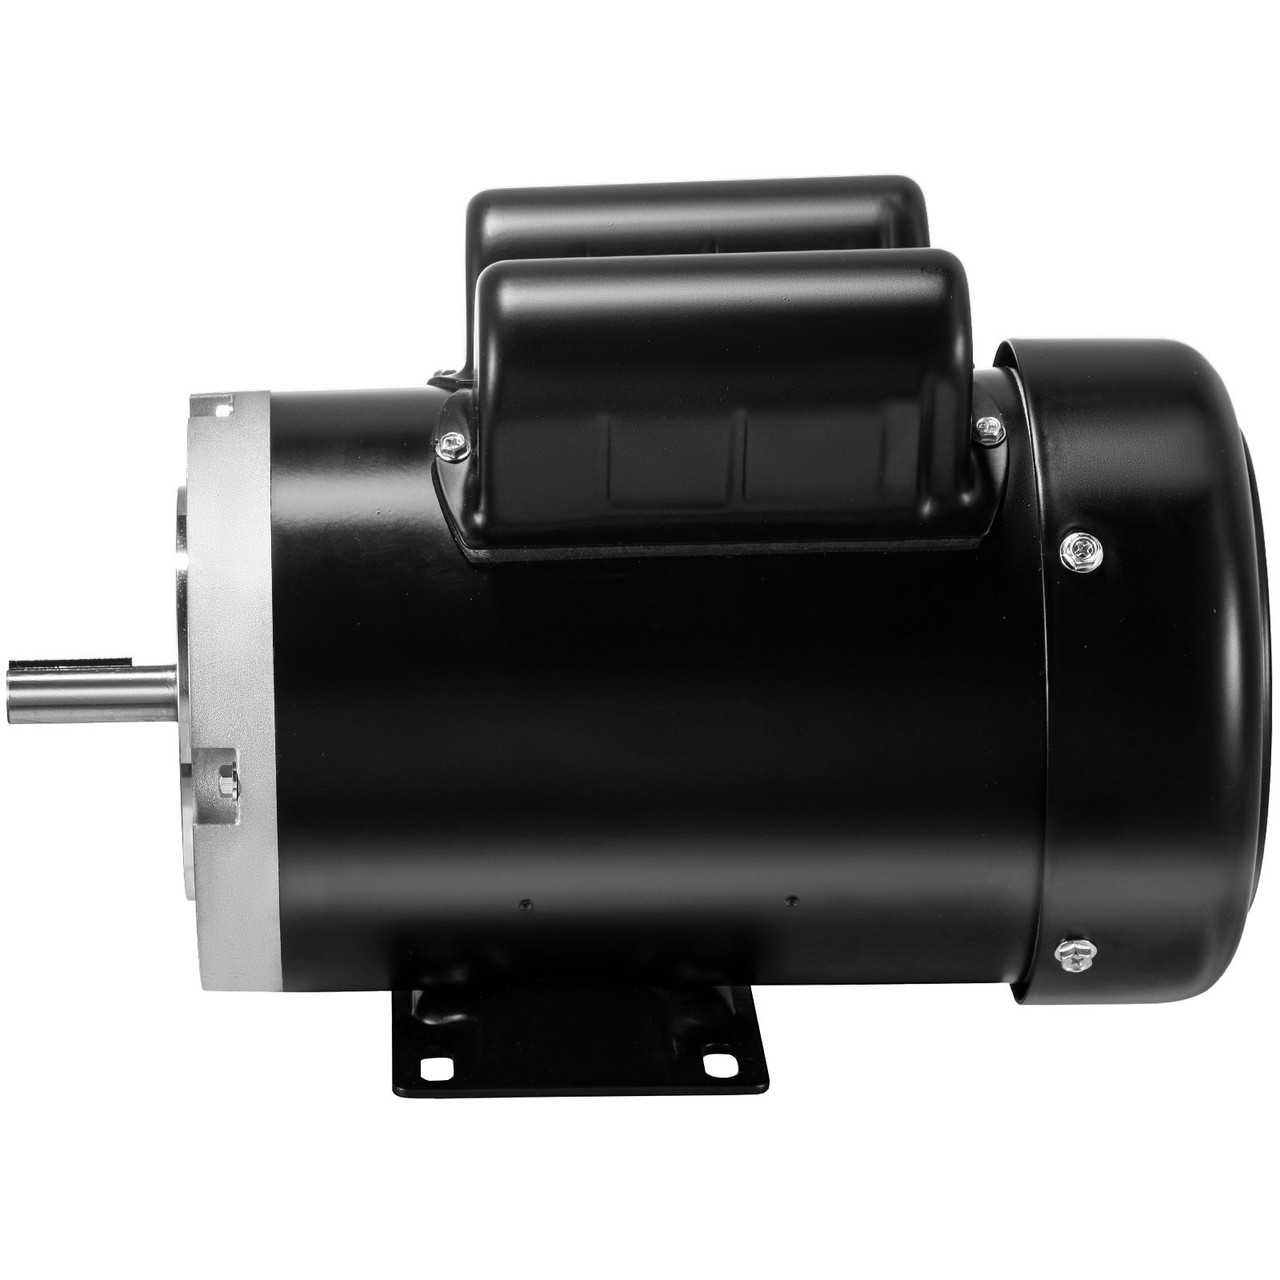 Electric Compressor Motor, 2 HP, Rated Speed 1725 RPM Single Phase Electric Motor, AC 115V 230V Air Compressor Motor 56C Frame, Suitable for Agricultural Machinery and General Equipment